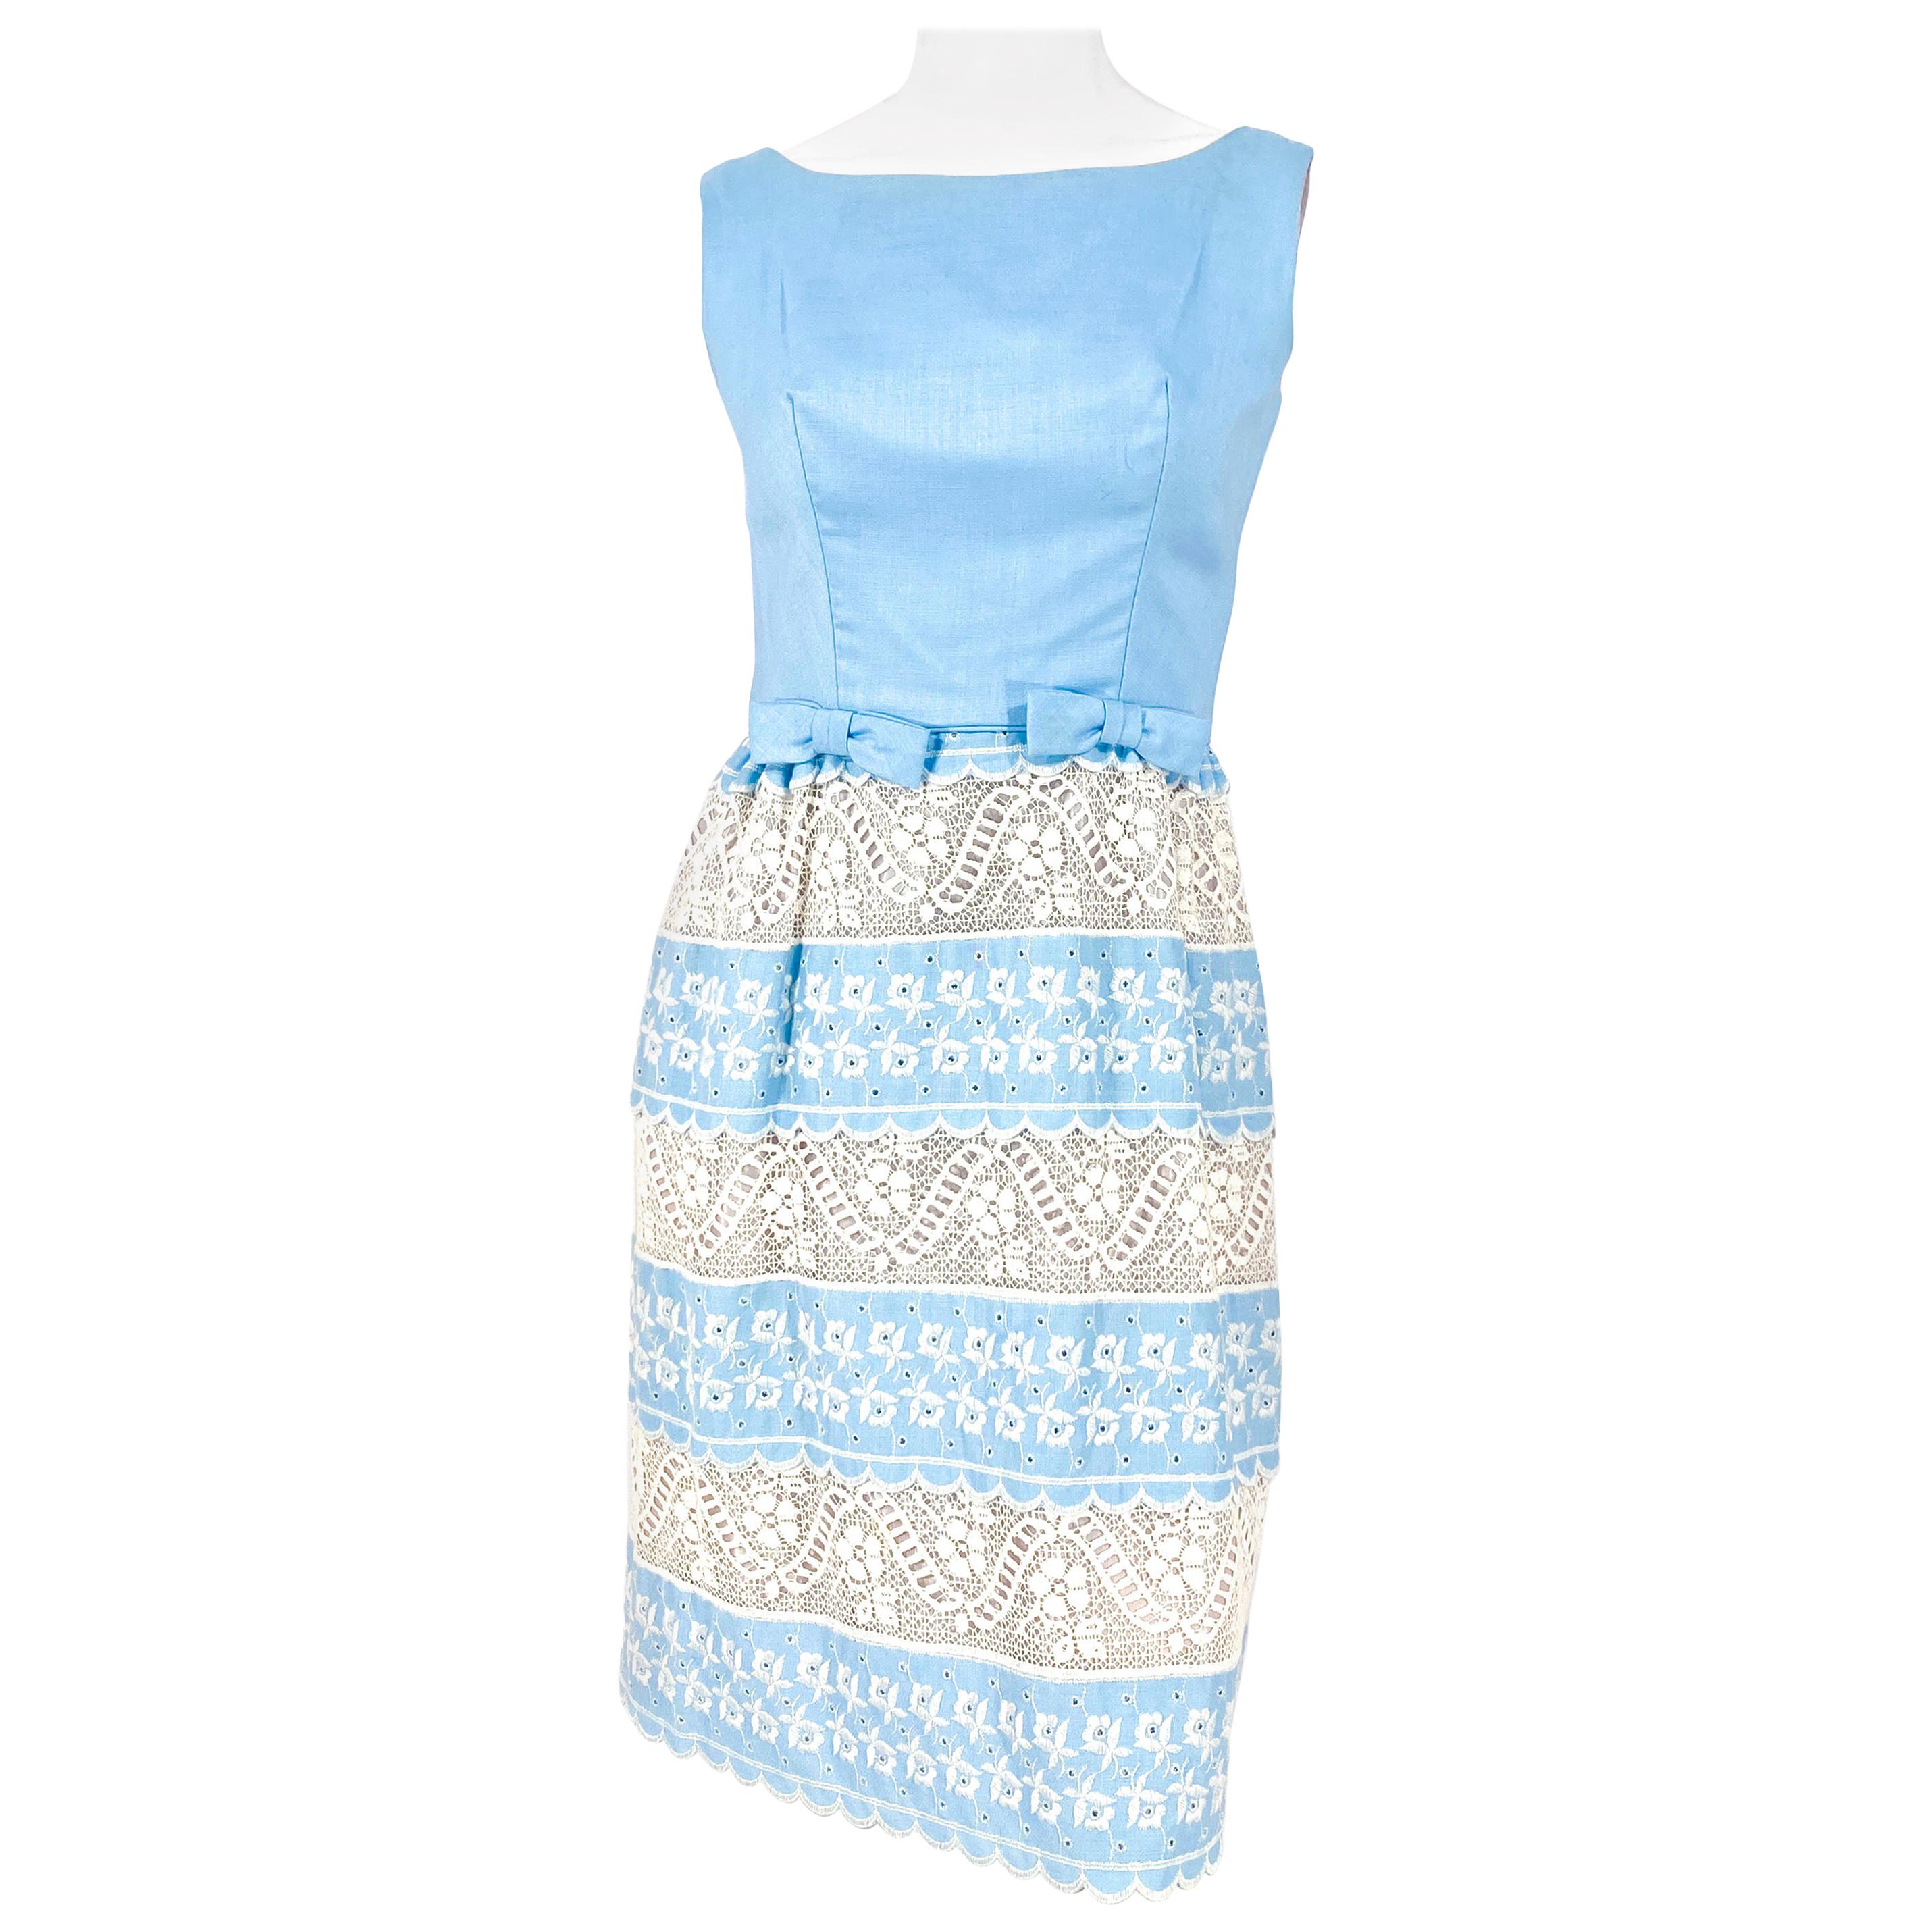 1960s Baby Blue Lace and Embroidered Sleeveless Dress